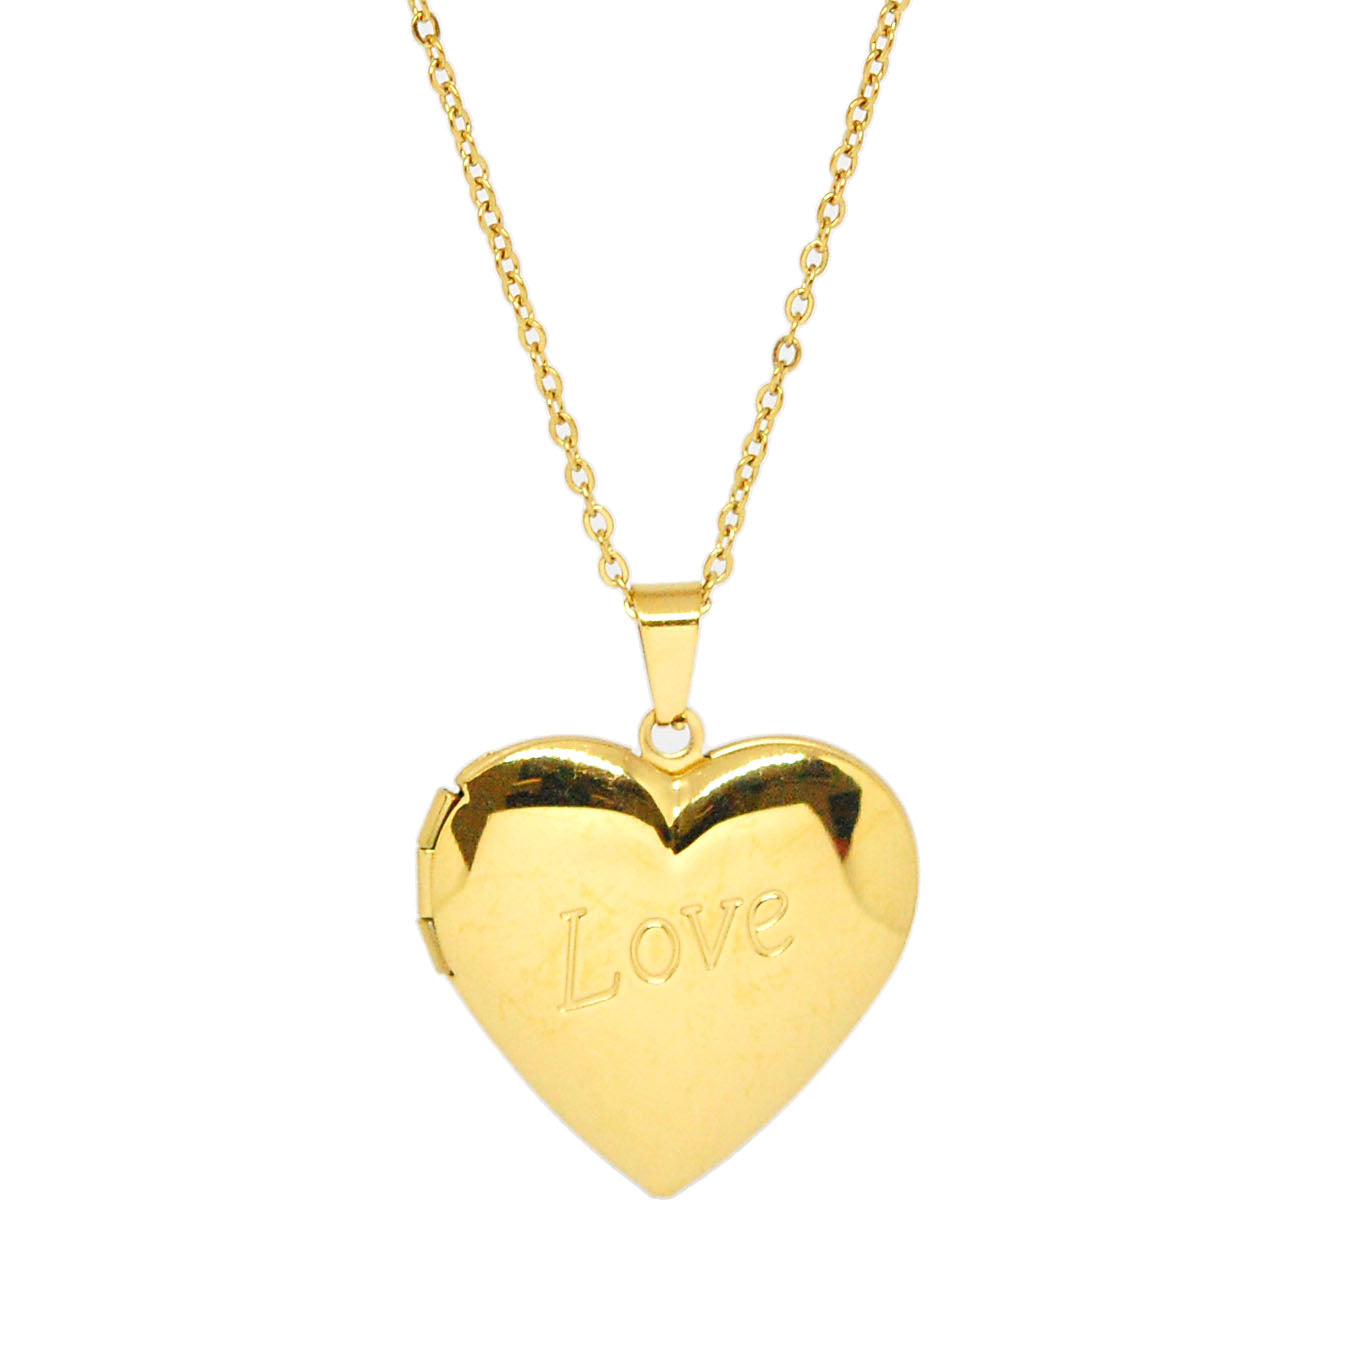 ESN 7656: All IPG XL "Love" Heart Necklace (27mmx29mm)